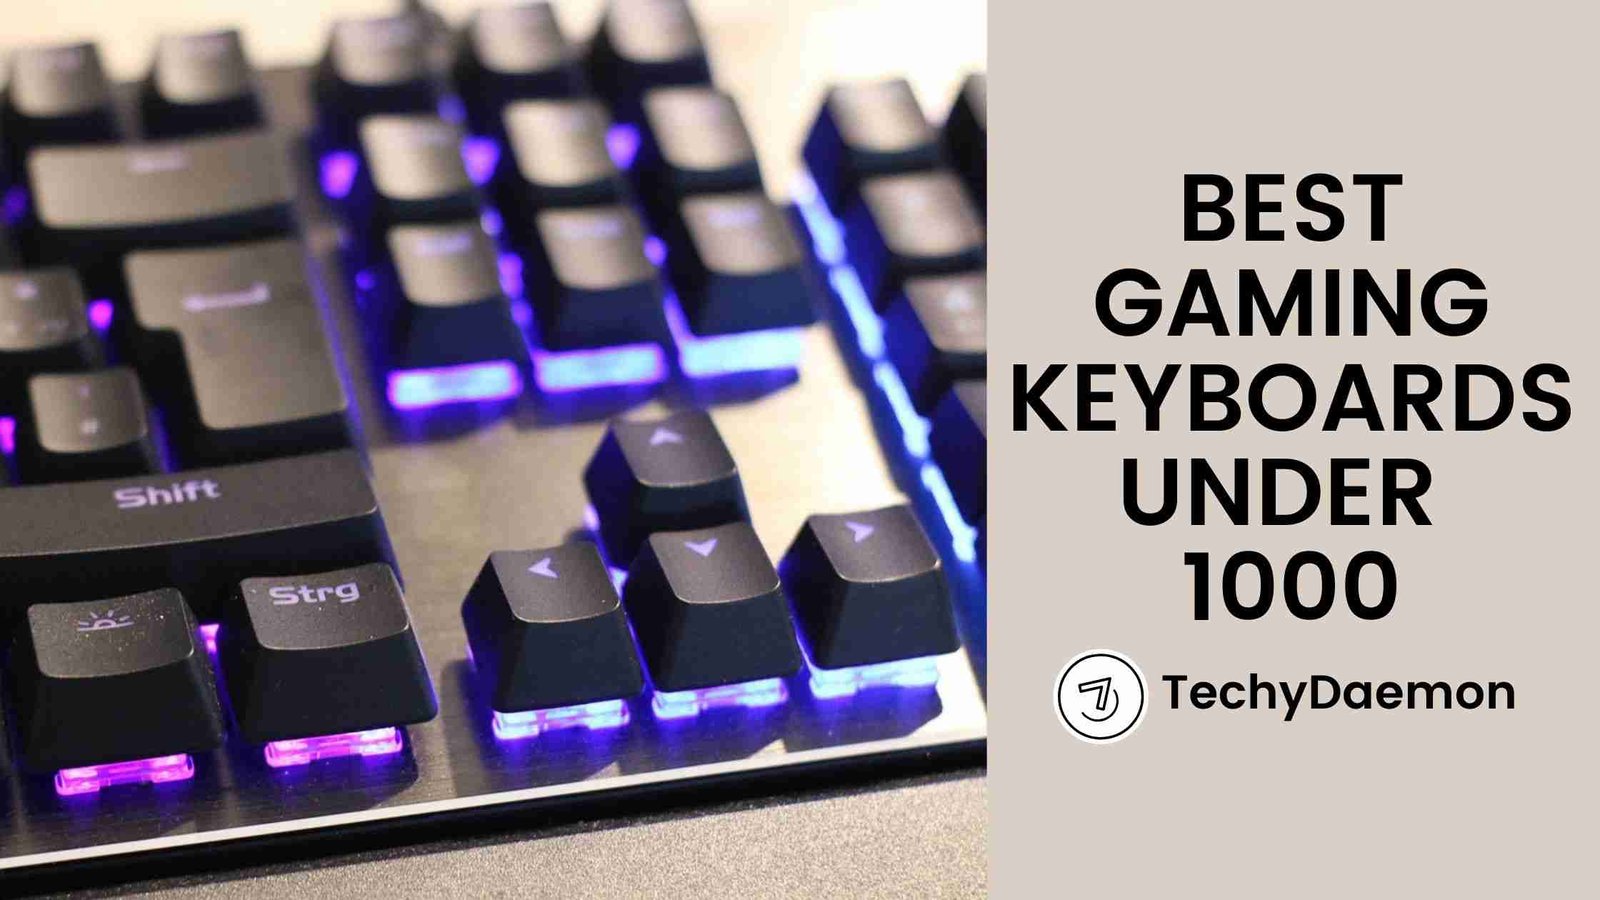 Futuristic Best Gaming Keyboards Under 1000 with Futuristic Setup